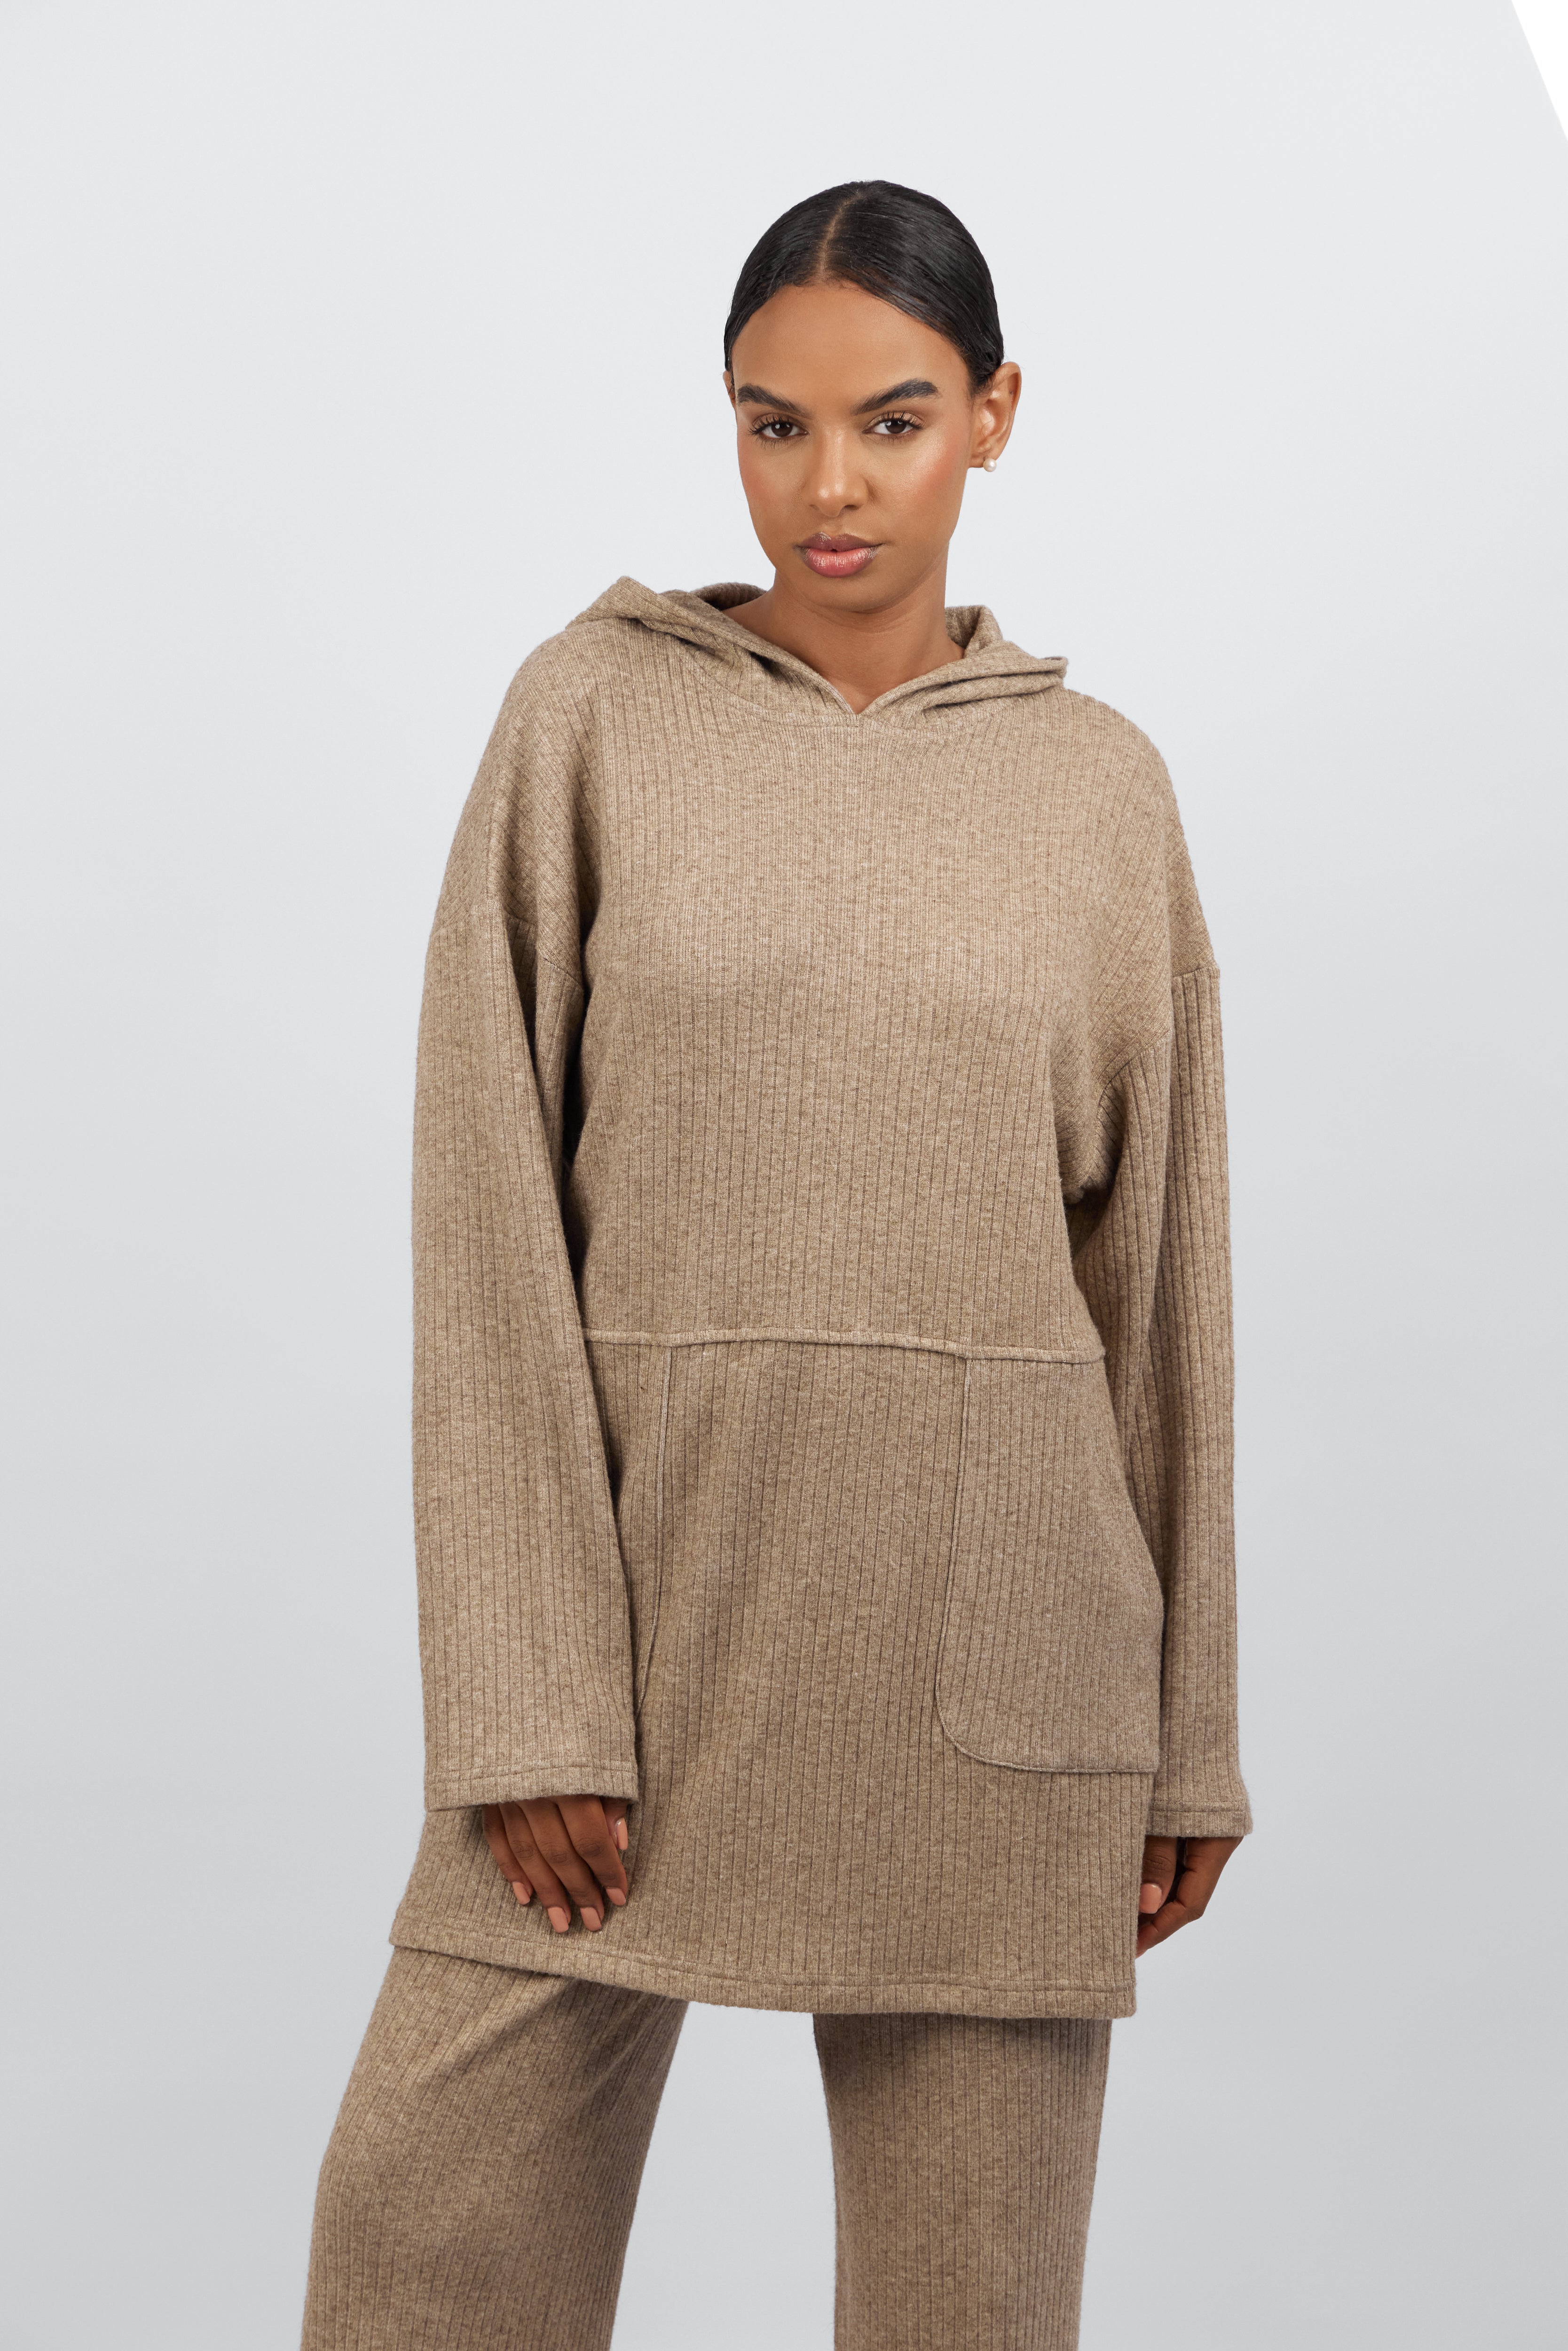 AE - Knit Relaxed Fit Hoodie - Pecan